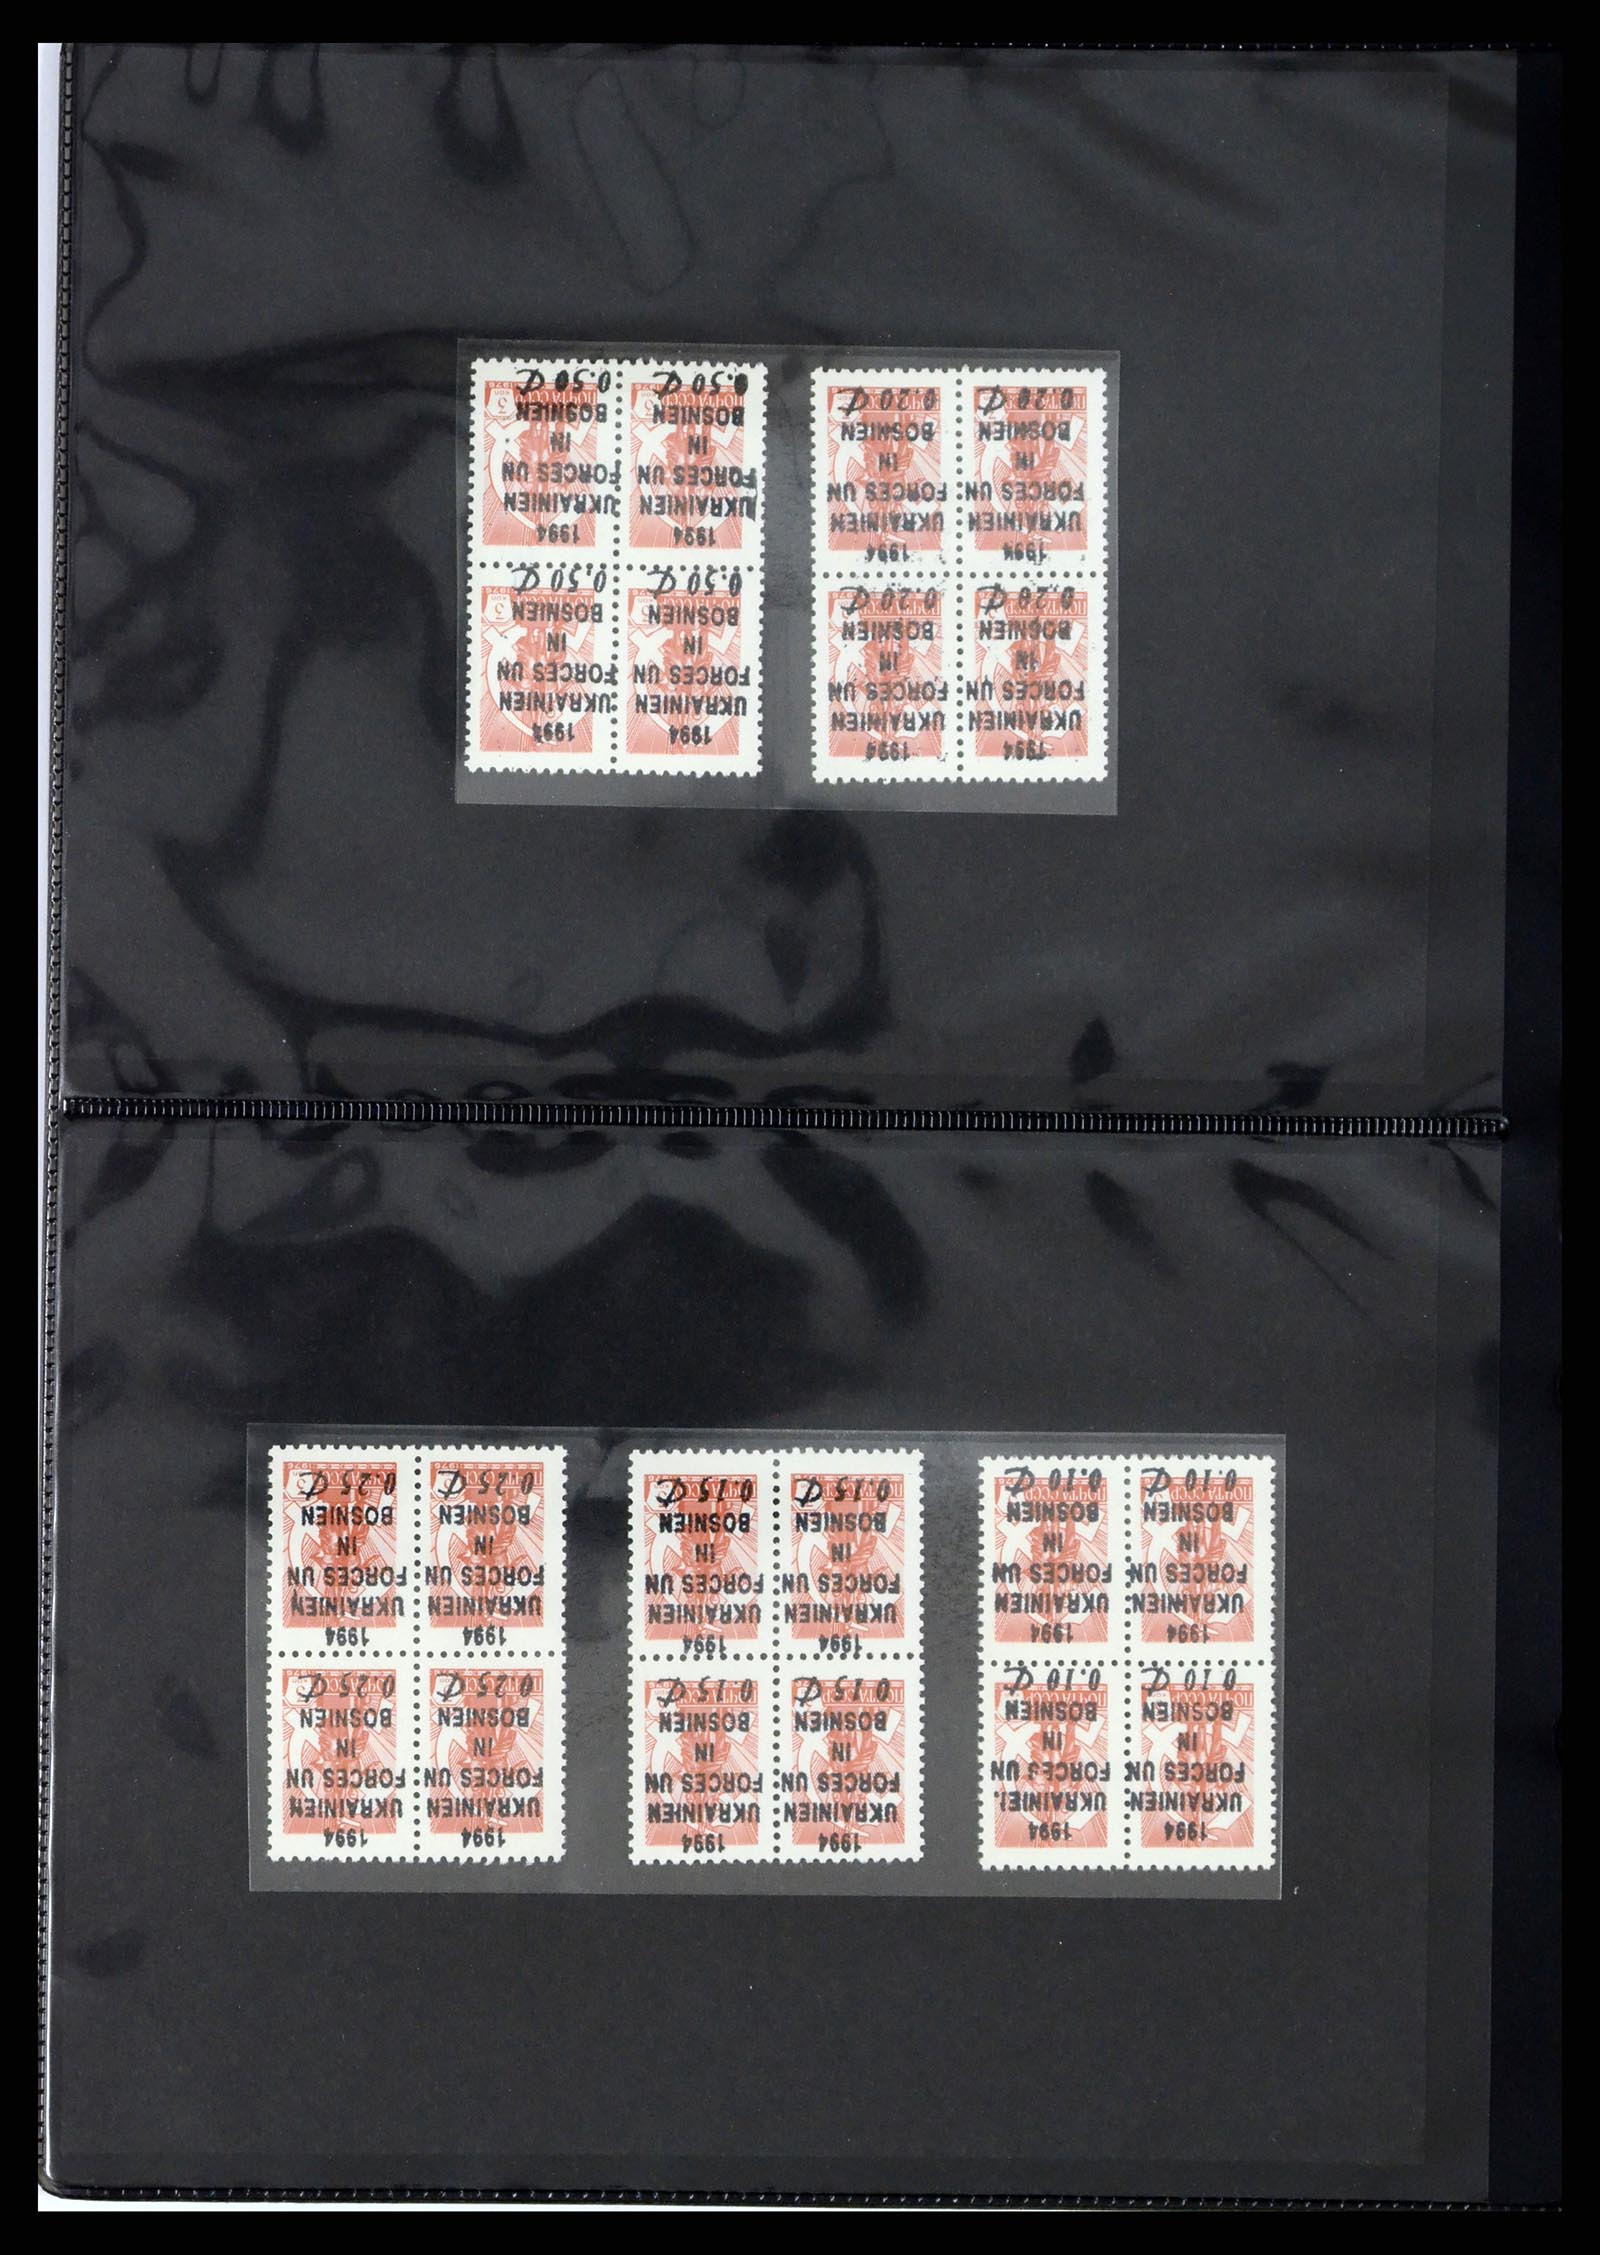 38113 0006 - Stamp collection 38113 Eastern Europe 1992-1996.